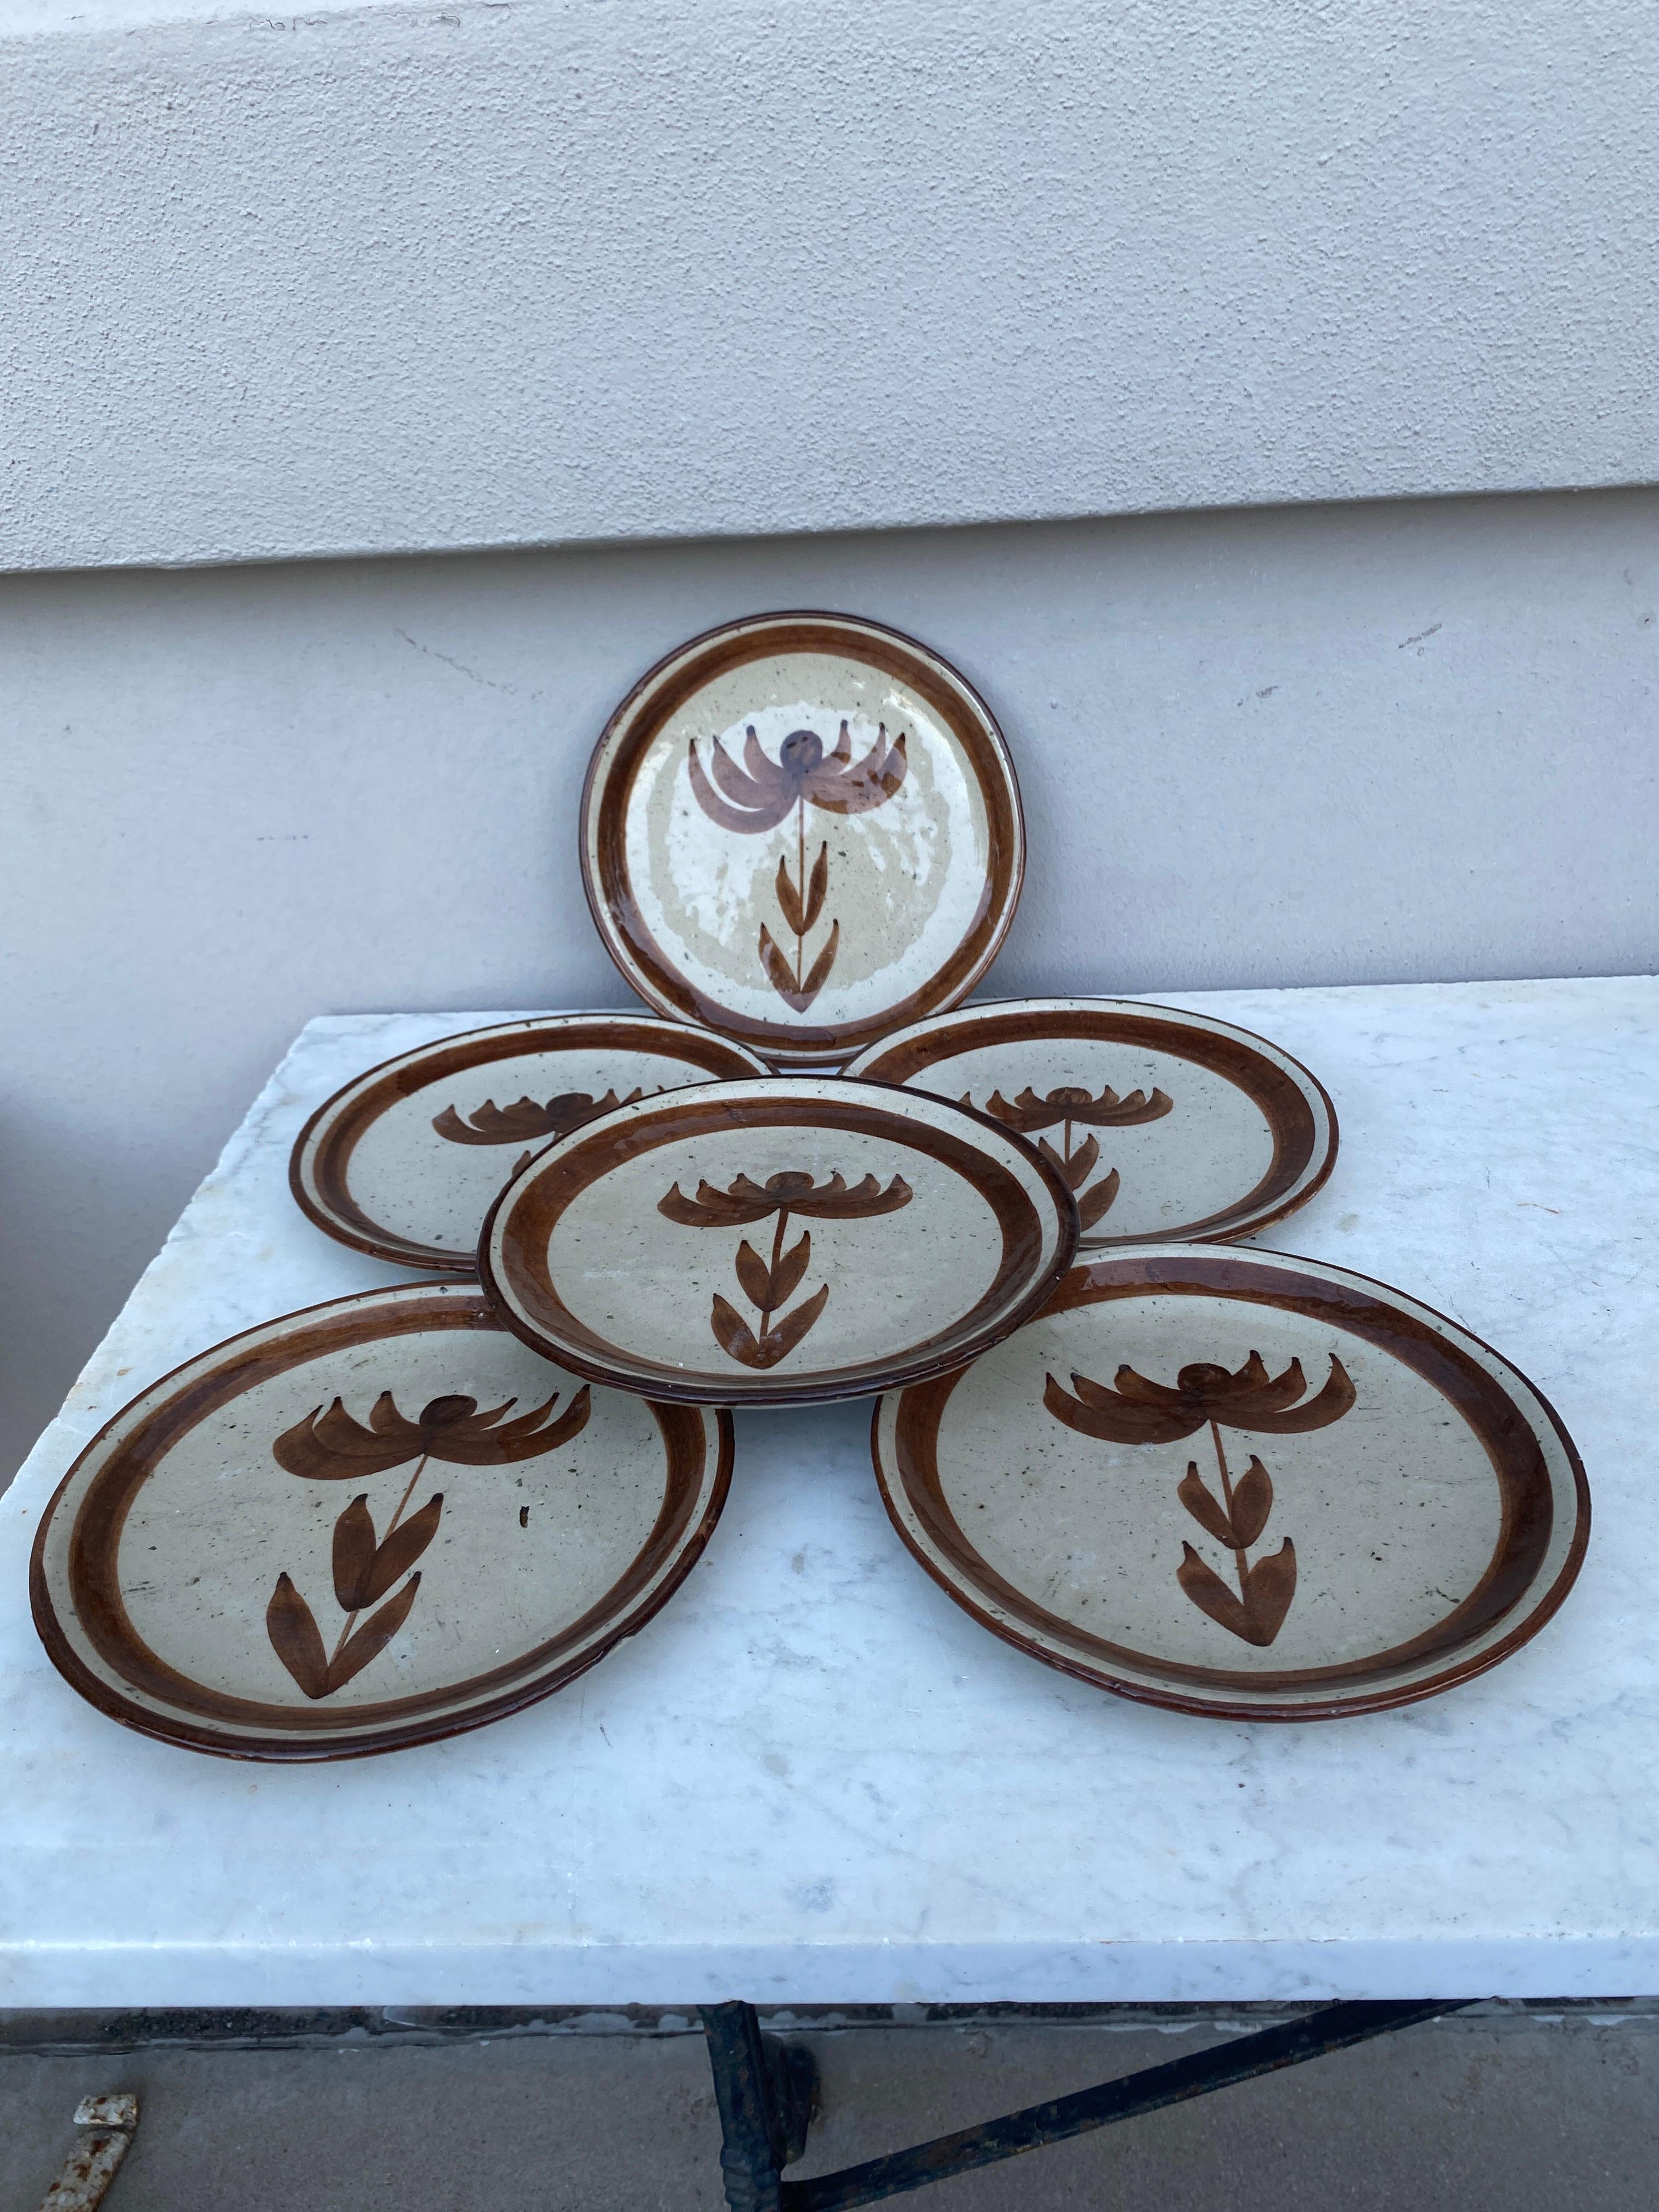 Mid-Century Set of 6 flowers dessert plates by Robert Picault Vallauris.
Robert Picault (1919 - 2000) was born in Vincennes, Paris and studied at the School of Applied Arts in Paris. After the war he spent a short time teaching drawing and in 1945